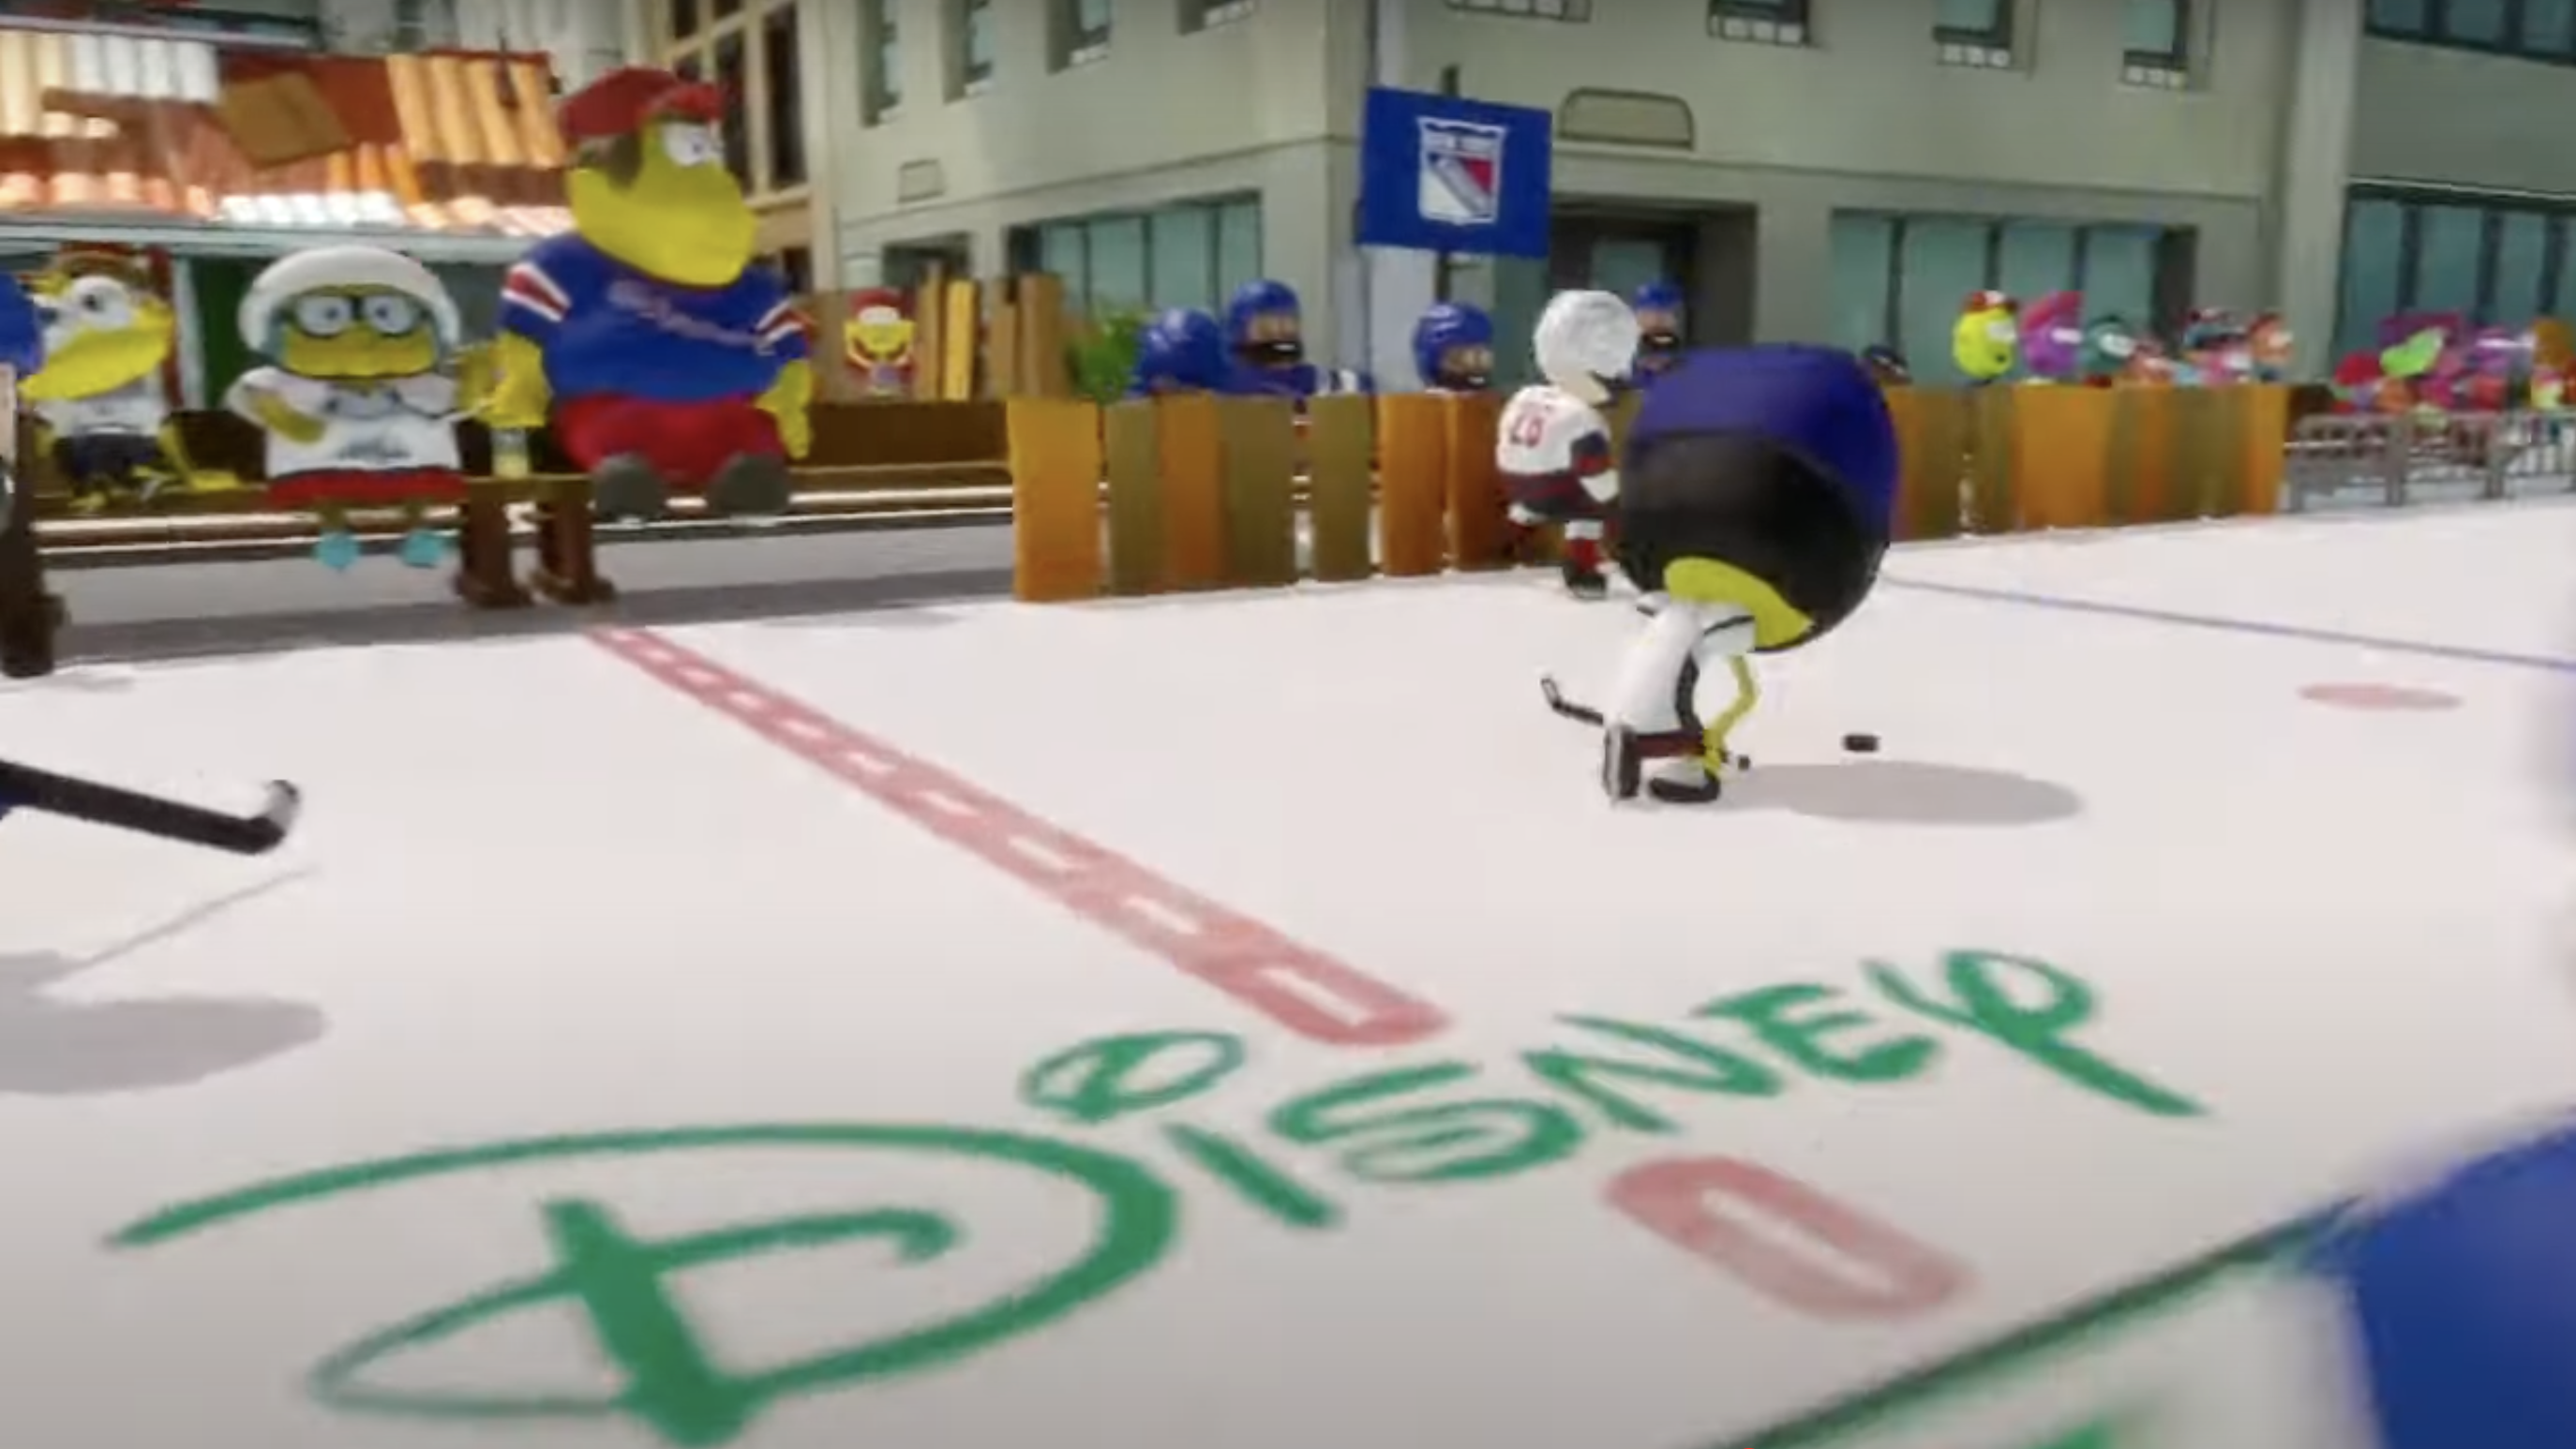 The NHL's Big City Greens Classic, a live 3D animated game, explained